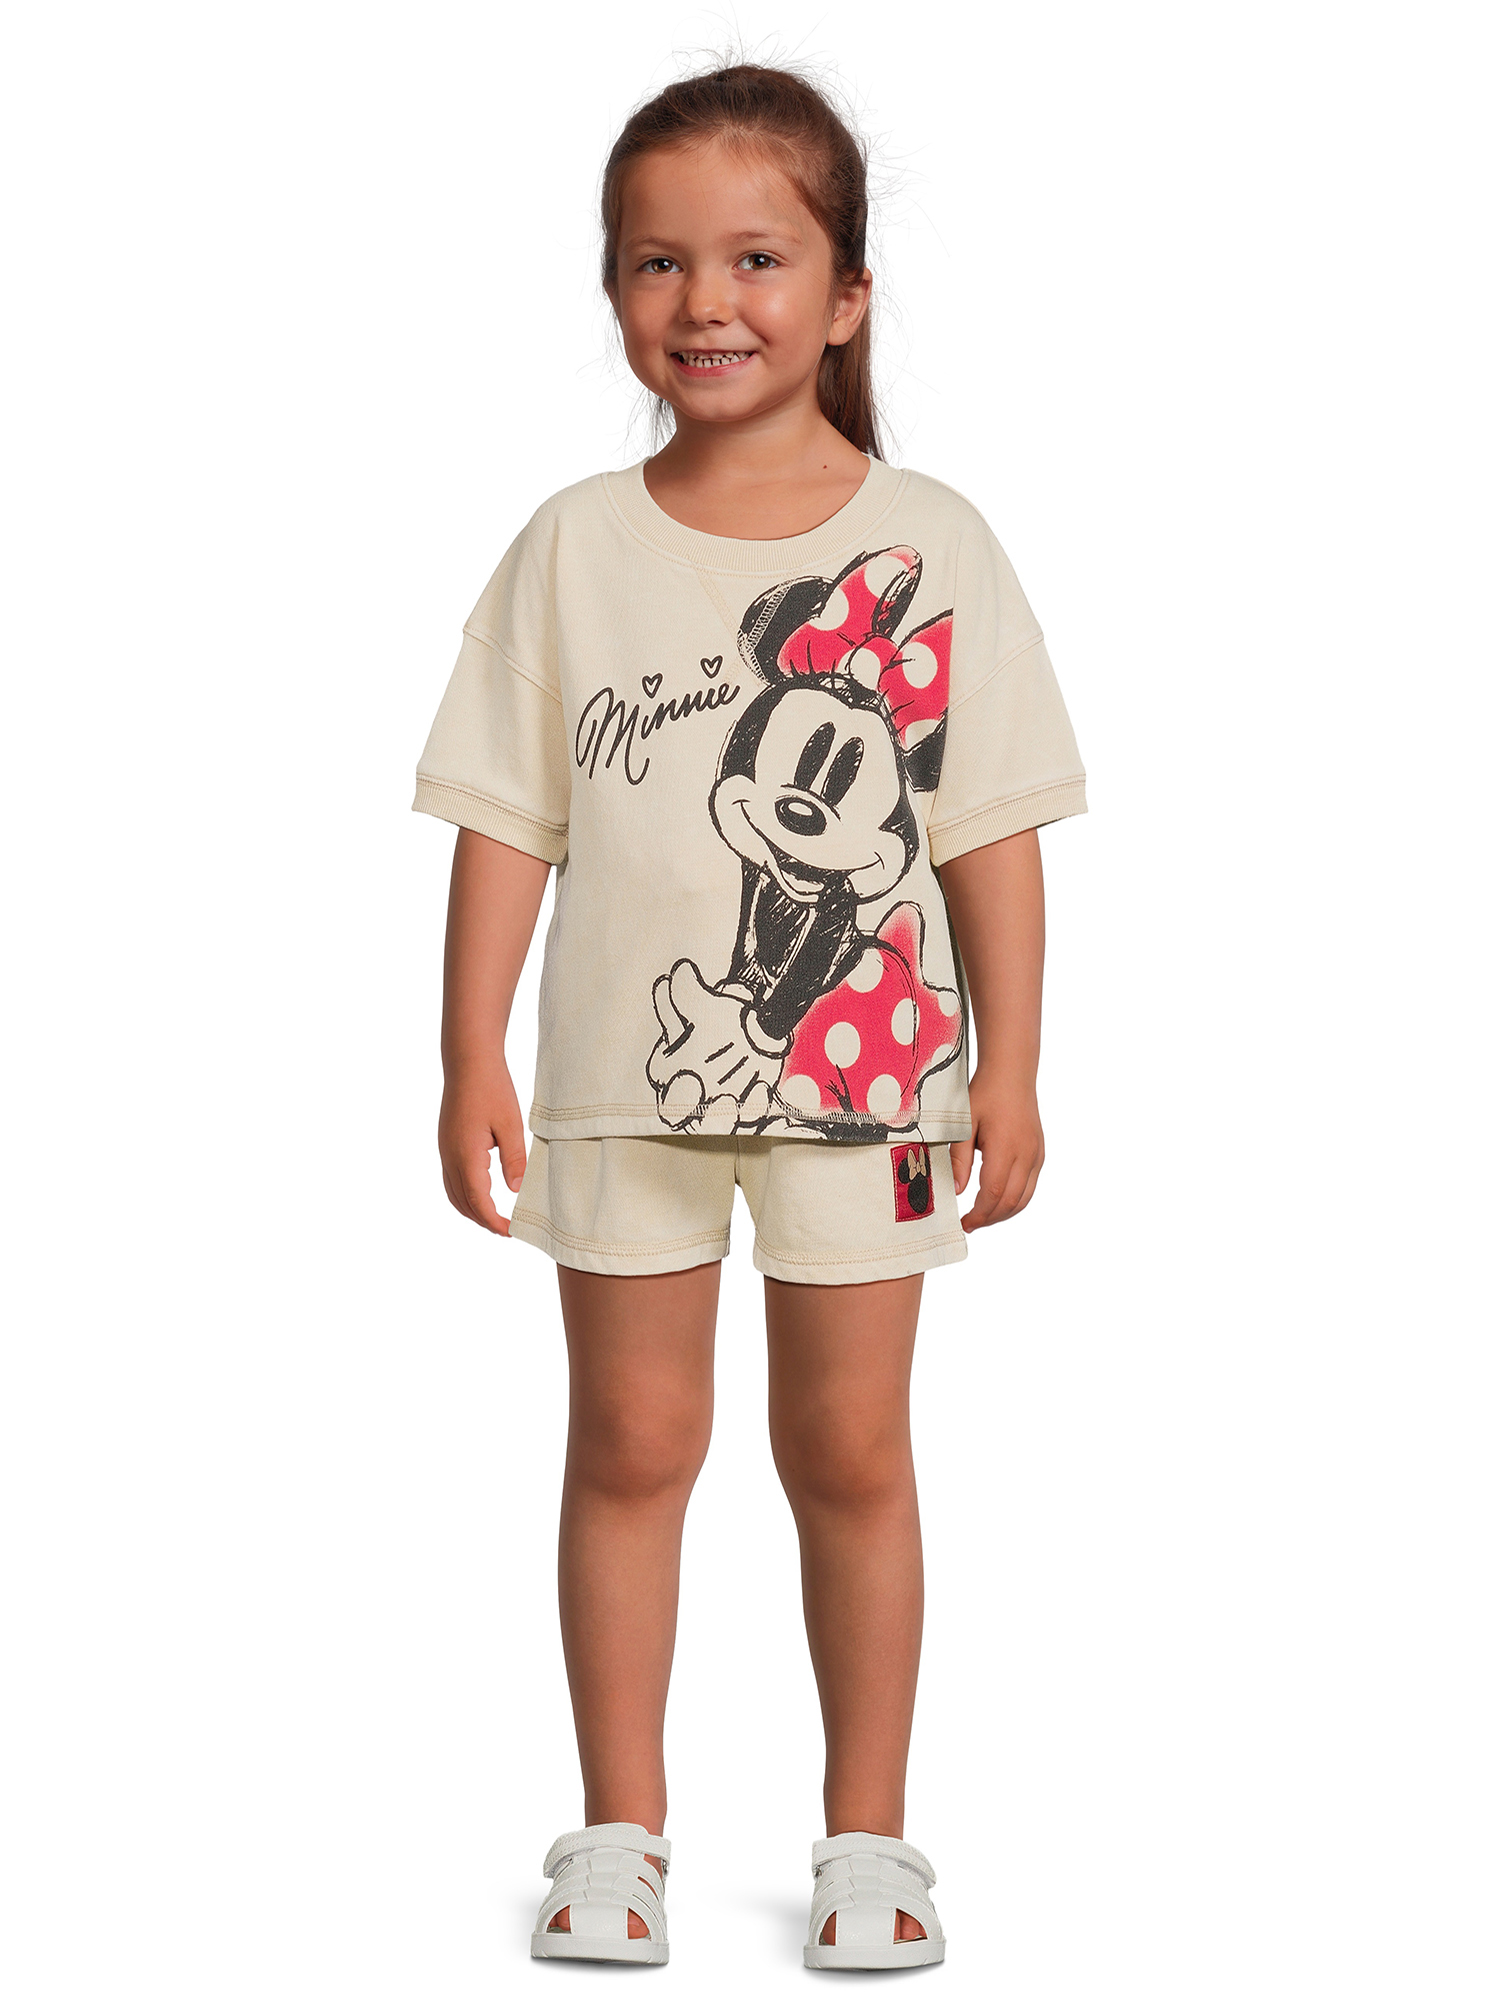 Minnie Mouse Toddler Girls Tee and Shorts Set, 2-Piece, Sizes 12M-5T - image 2 of 11